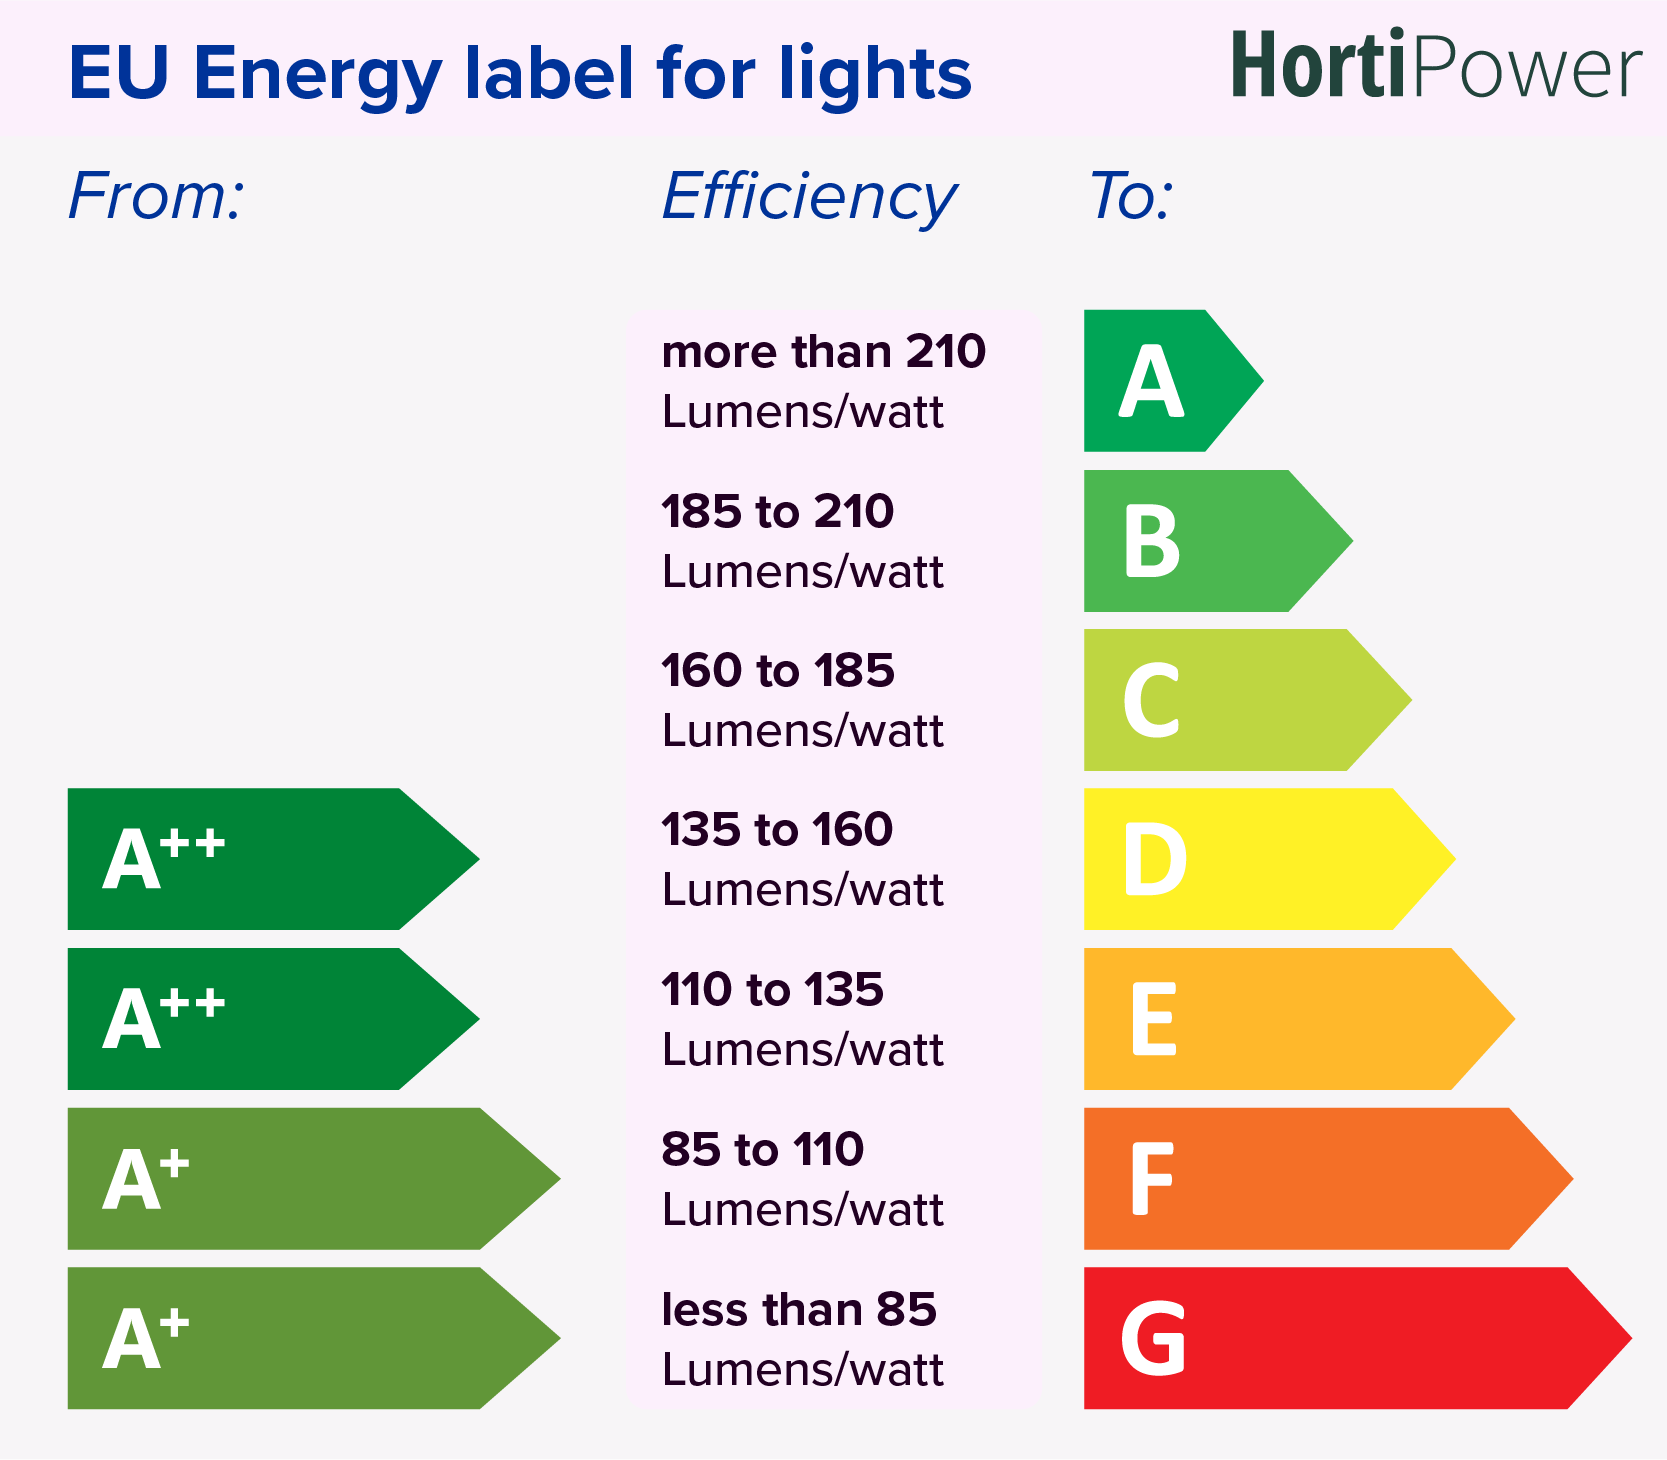 EU Energy Label for Lights from 2021